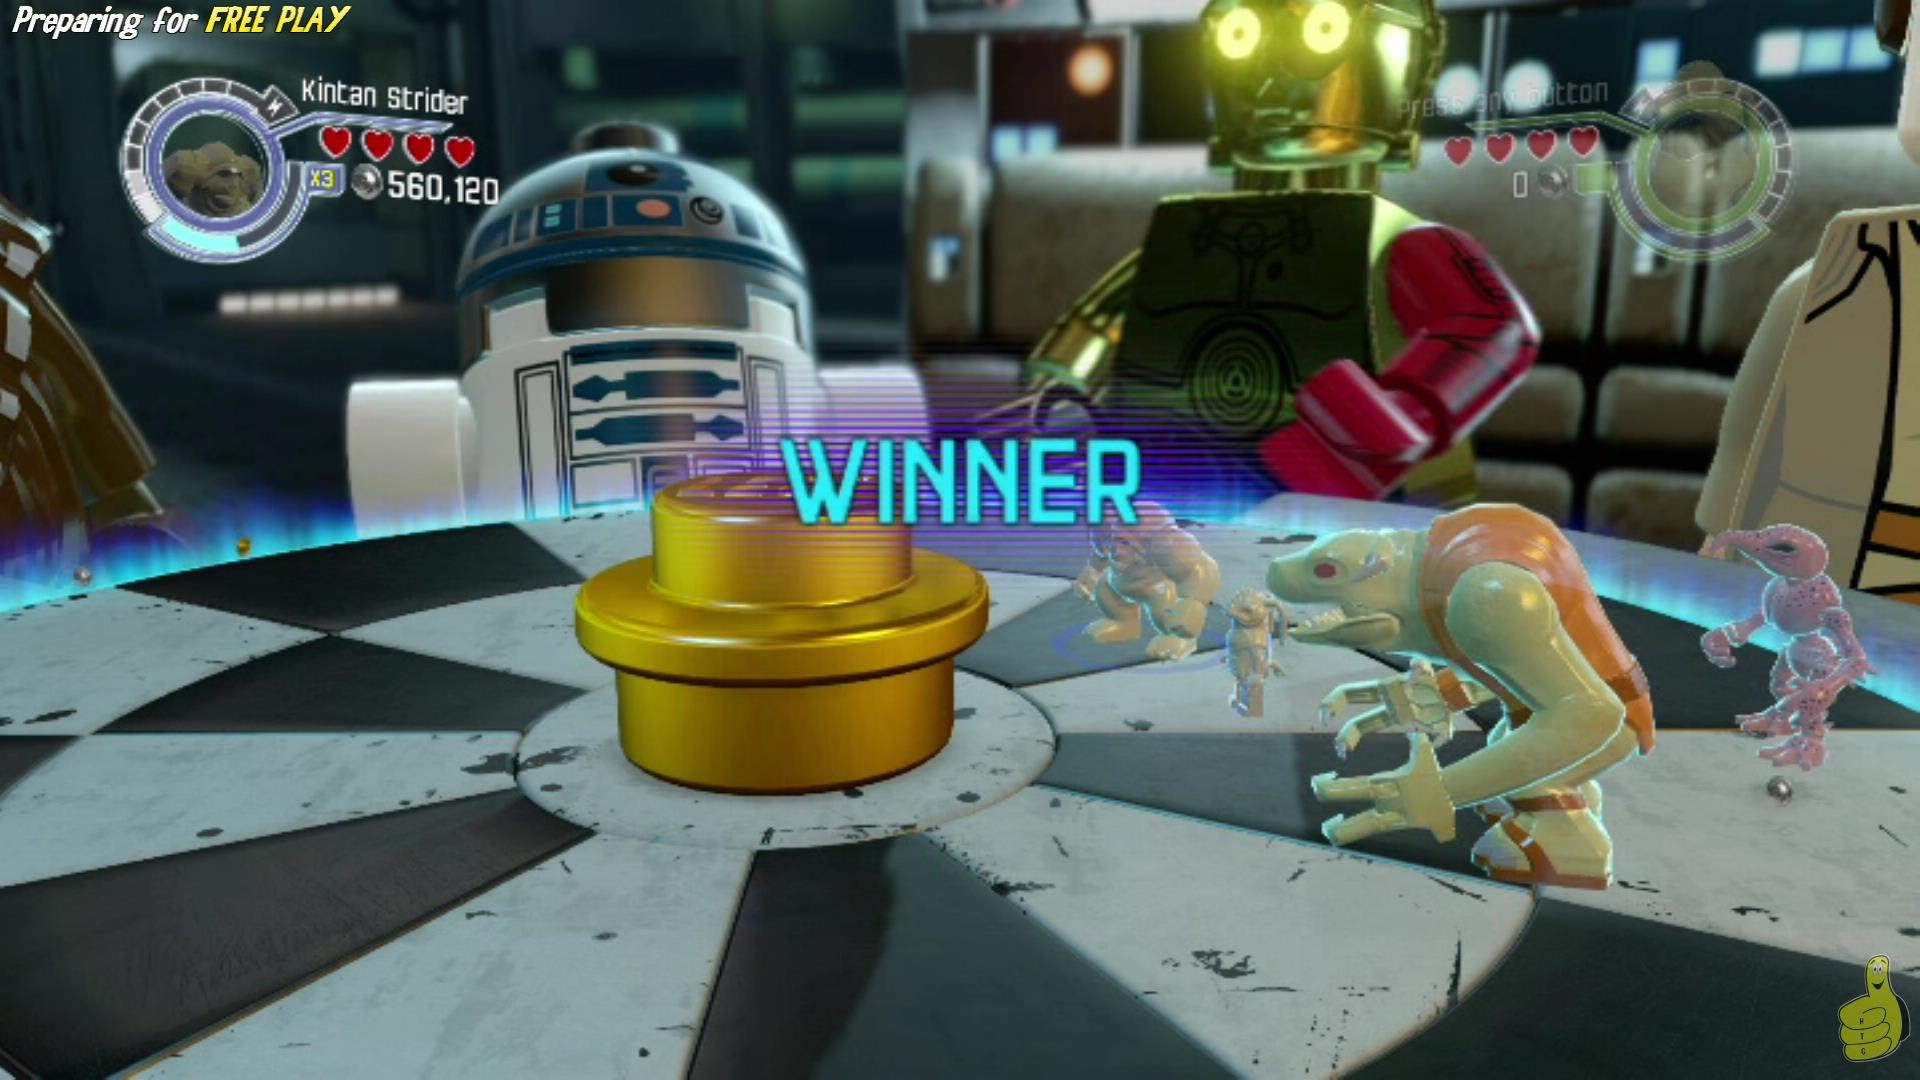 Lego Star Wars The Force Awakens: Preparing For FREE PLAY  – HTG